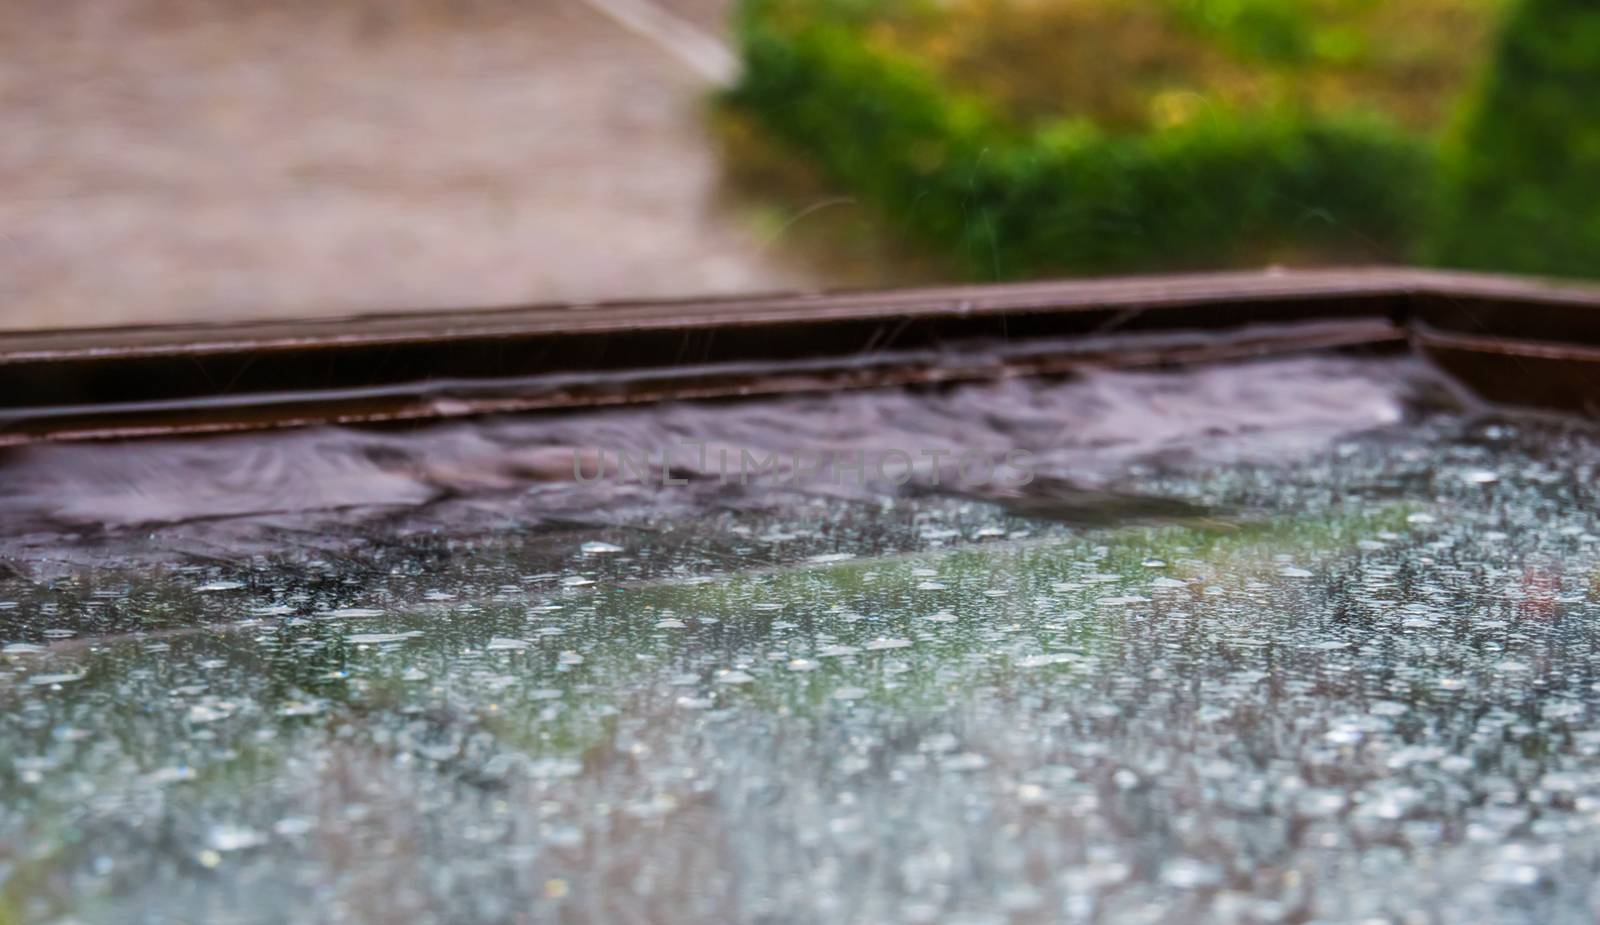 closeup of a wet window during rainy weather, the european climate by charlottebleijenberg